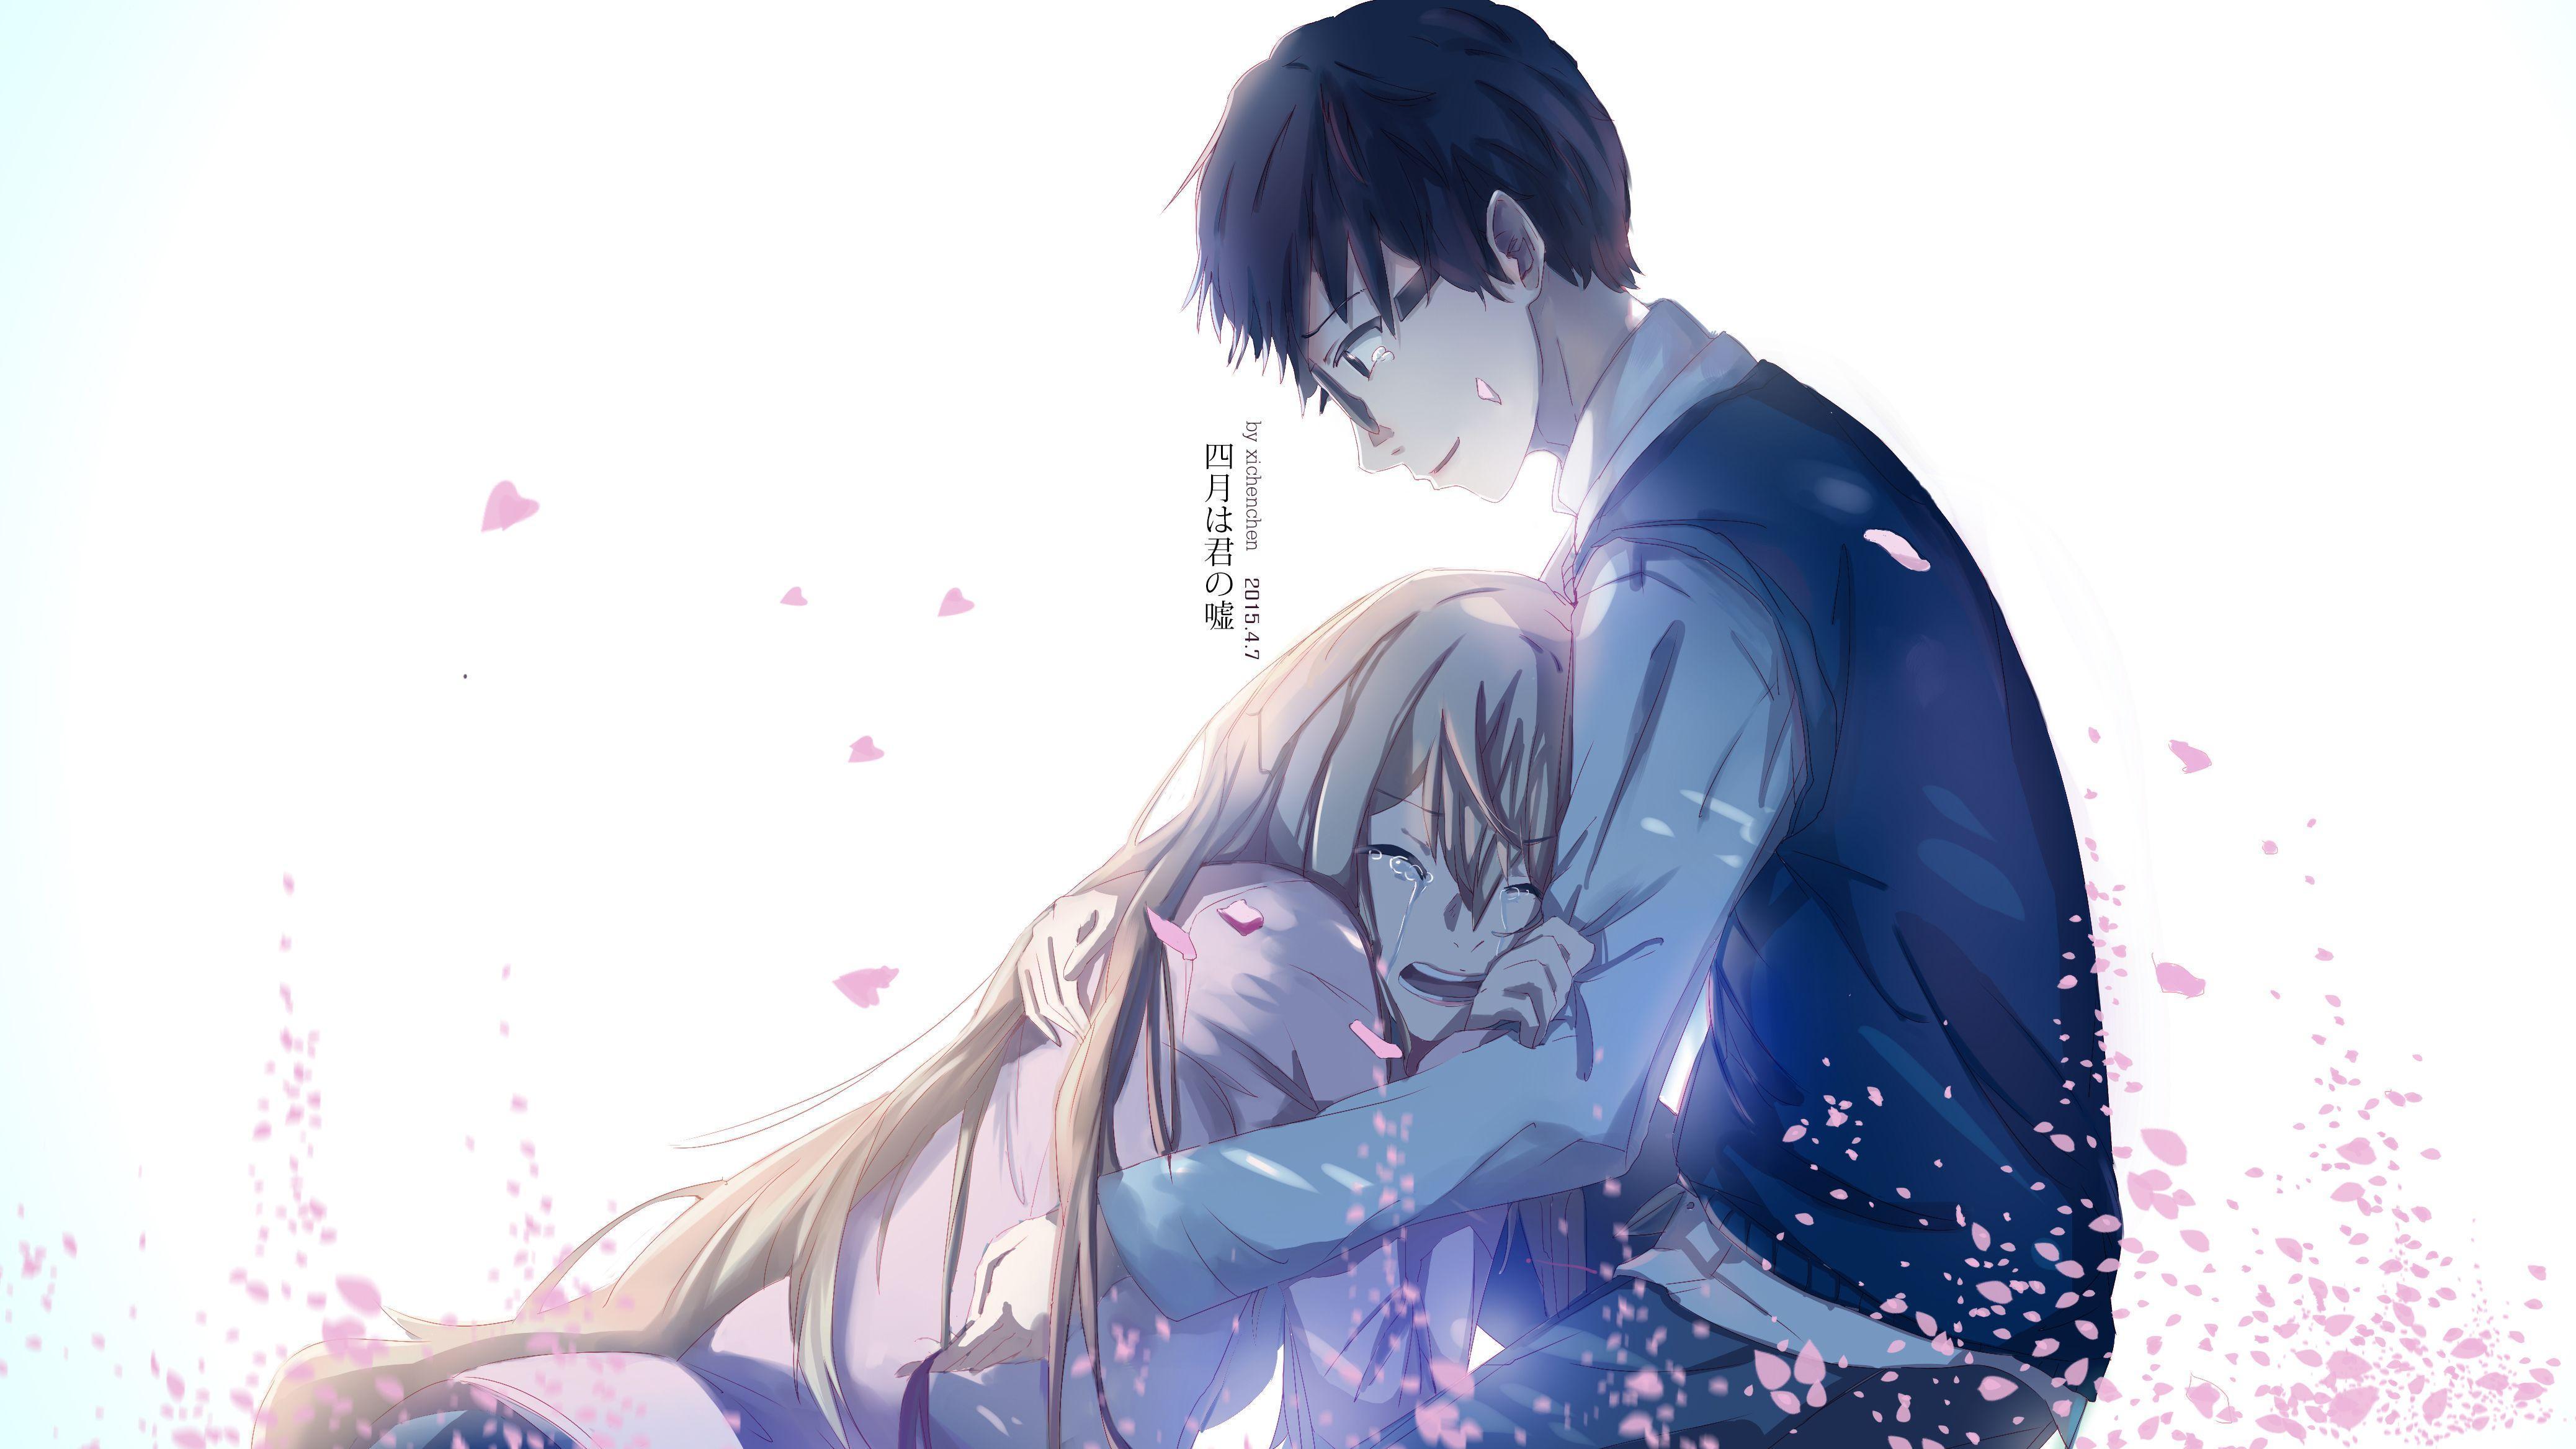 Your Lie In April Wallpaper Download, Your Lie In April, Anime